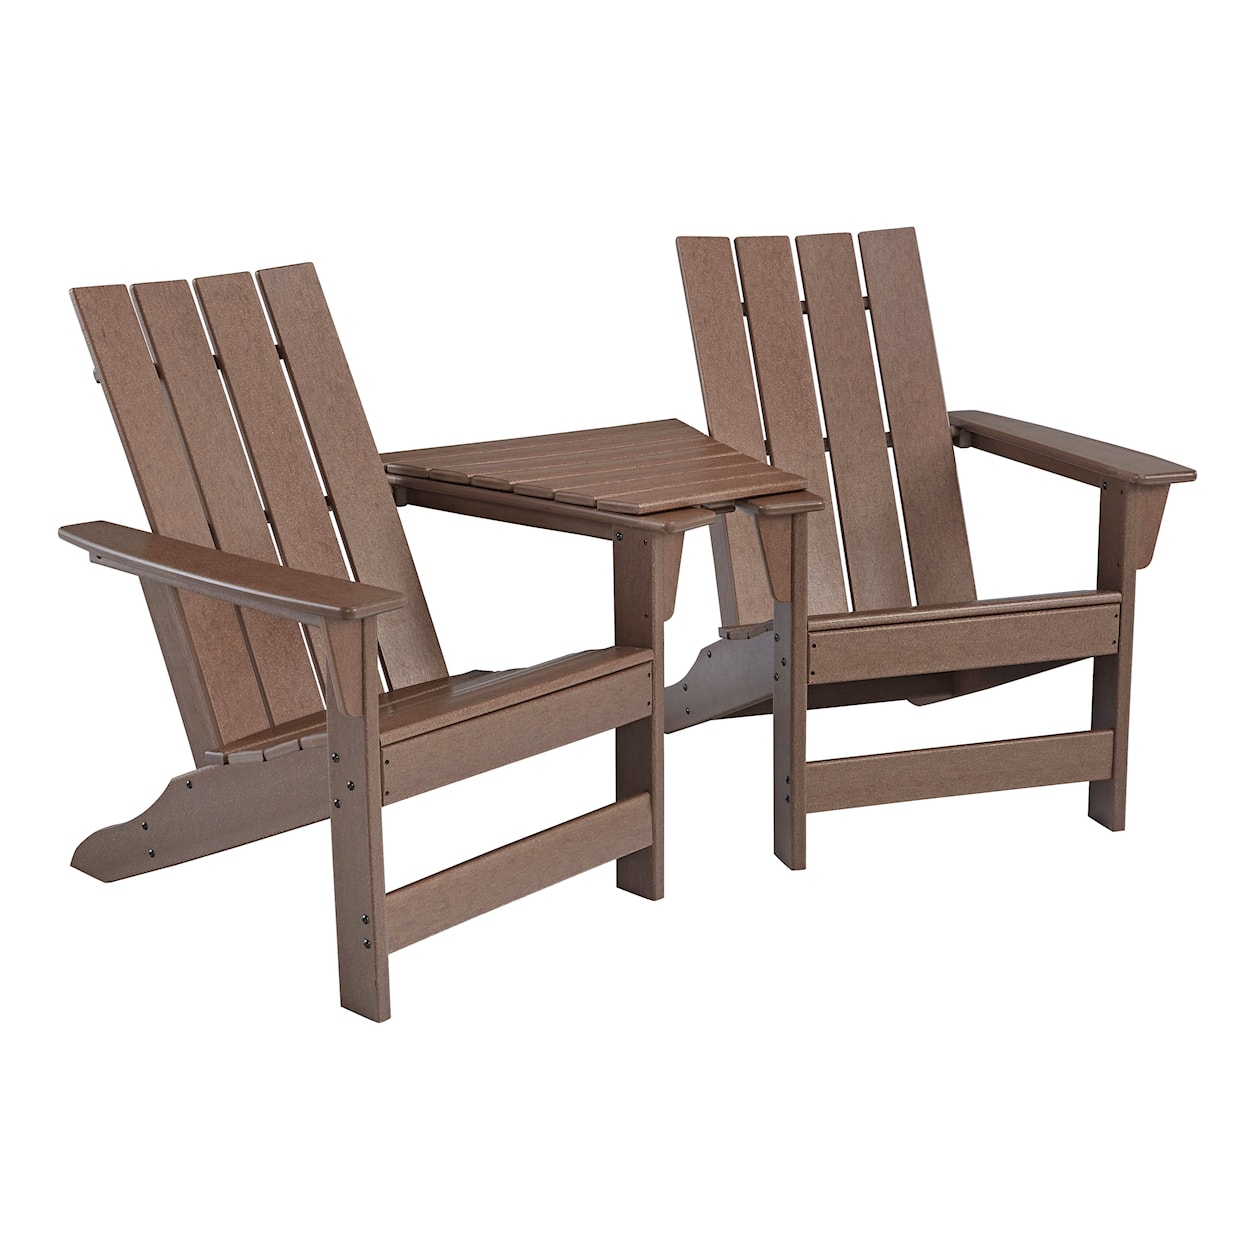 Benchcraft Emmeline Adirondack Chair Set with Tete-A-Tete Table